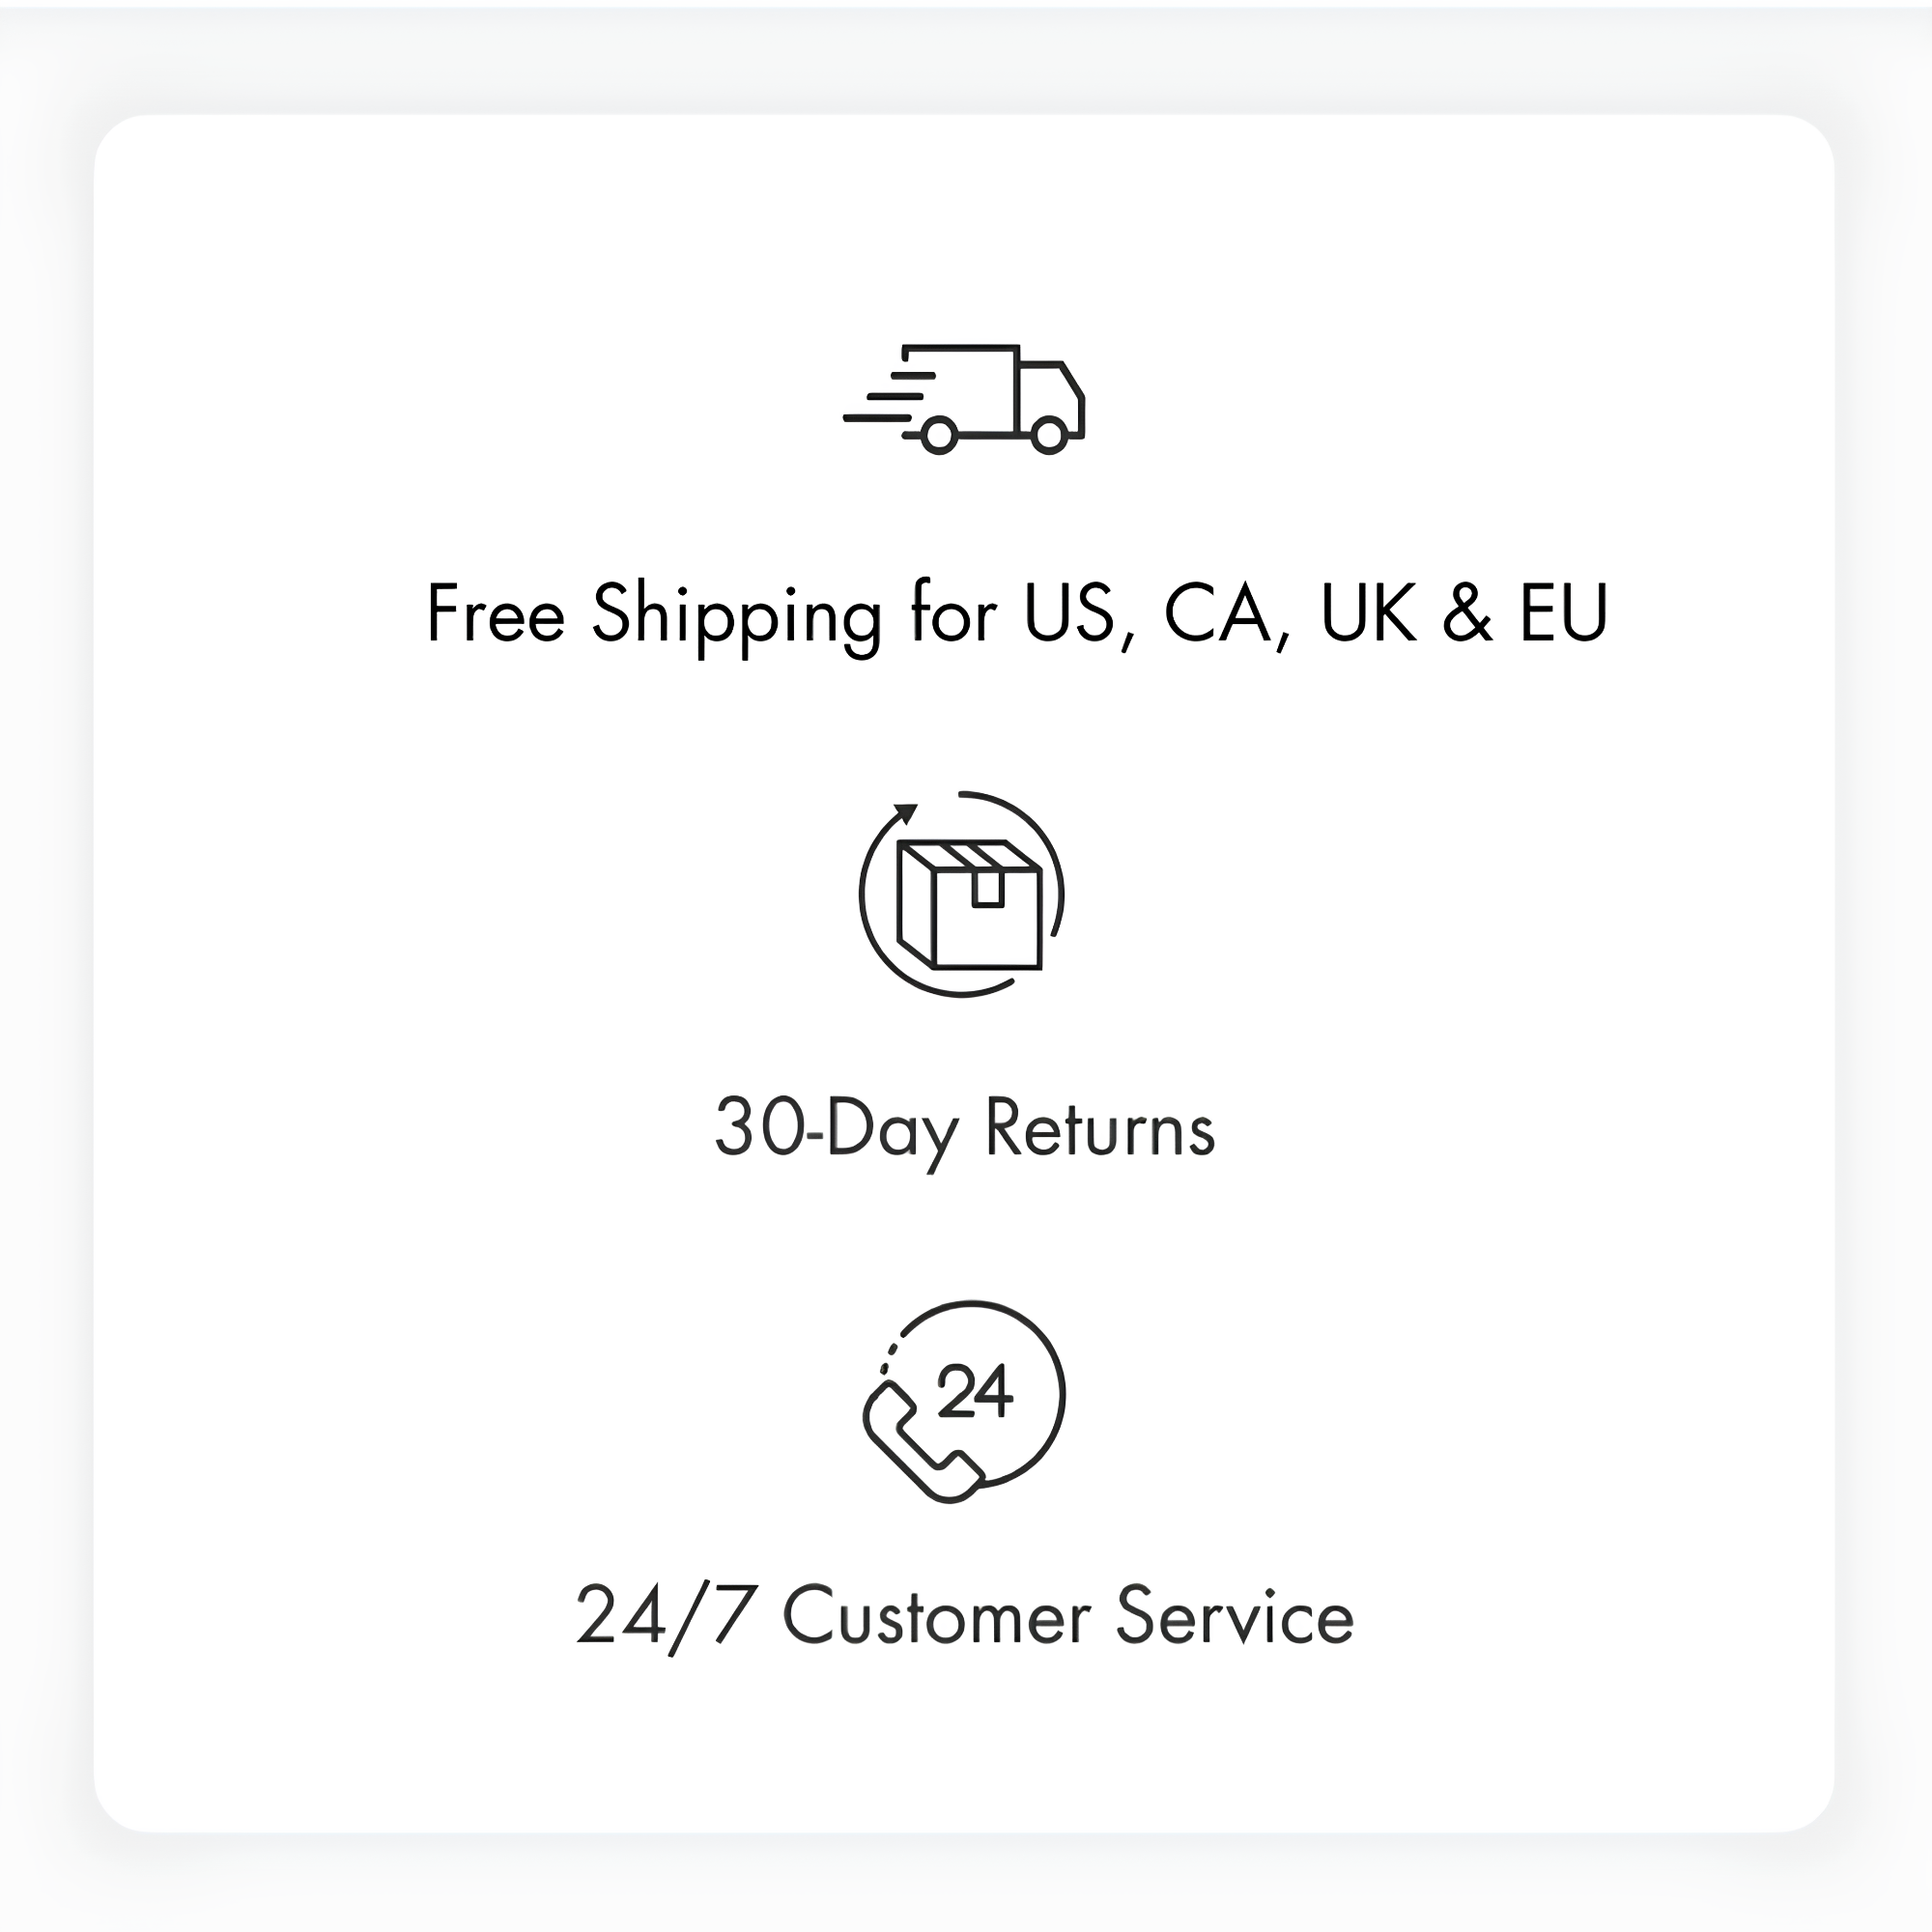 Icon representing free shipping for the US, CA, UK, and EU, along with icons for 30-day returns and 24/7 customer service. The image conveys the benefits of free shipping, easy returns, and around-the-clock customer support.